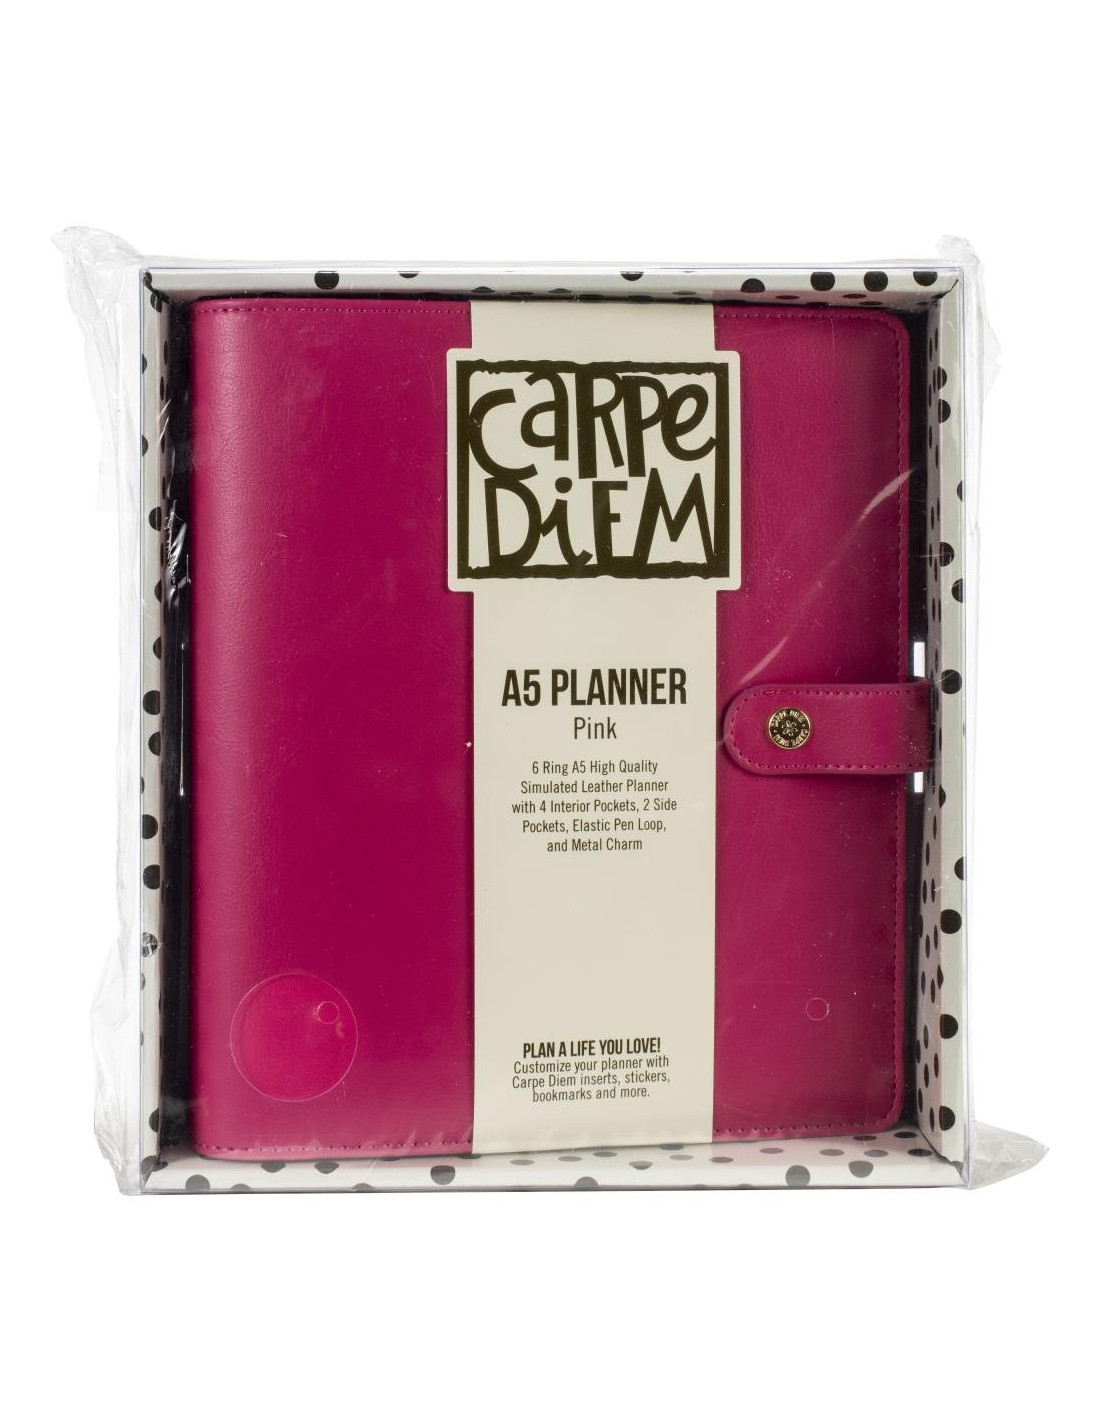 Carpe Diem Planner Feathers Boxed Set, A5, 6 Ring Simulated Leather W/ 4  Interior Pockets, 2 Side Pockets, Elastic Pen Loop, & Charm 